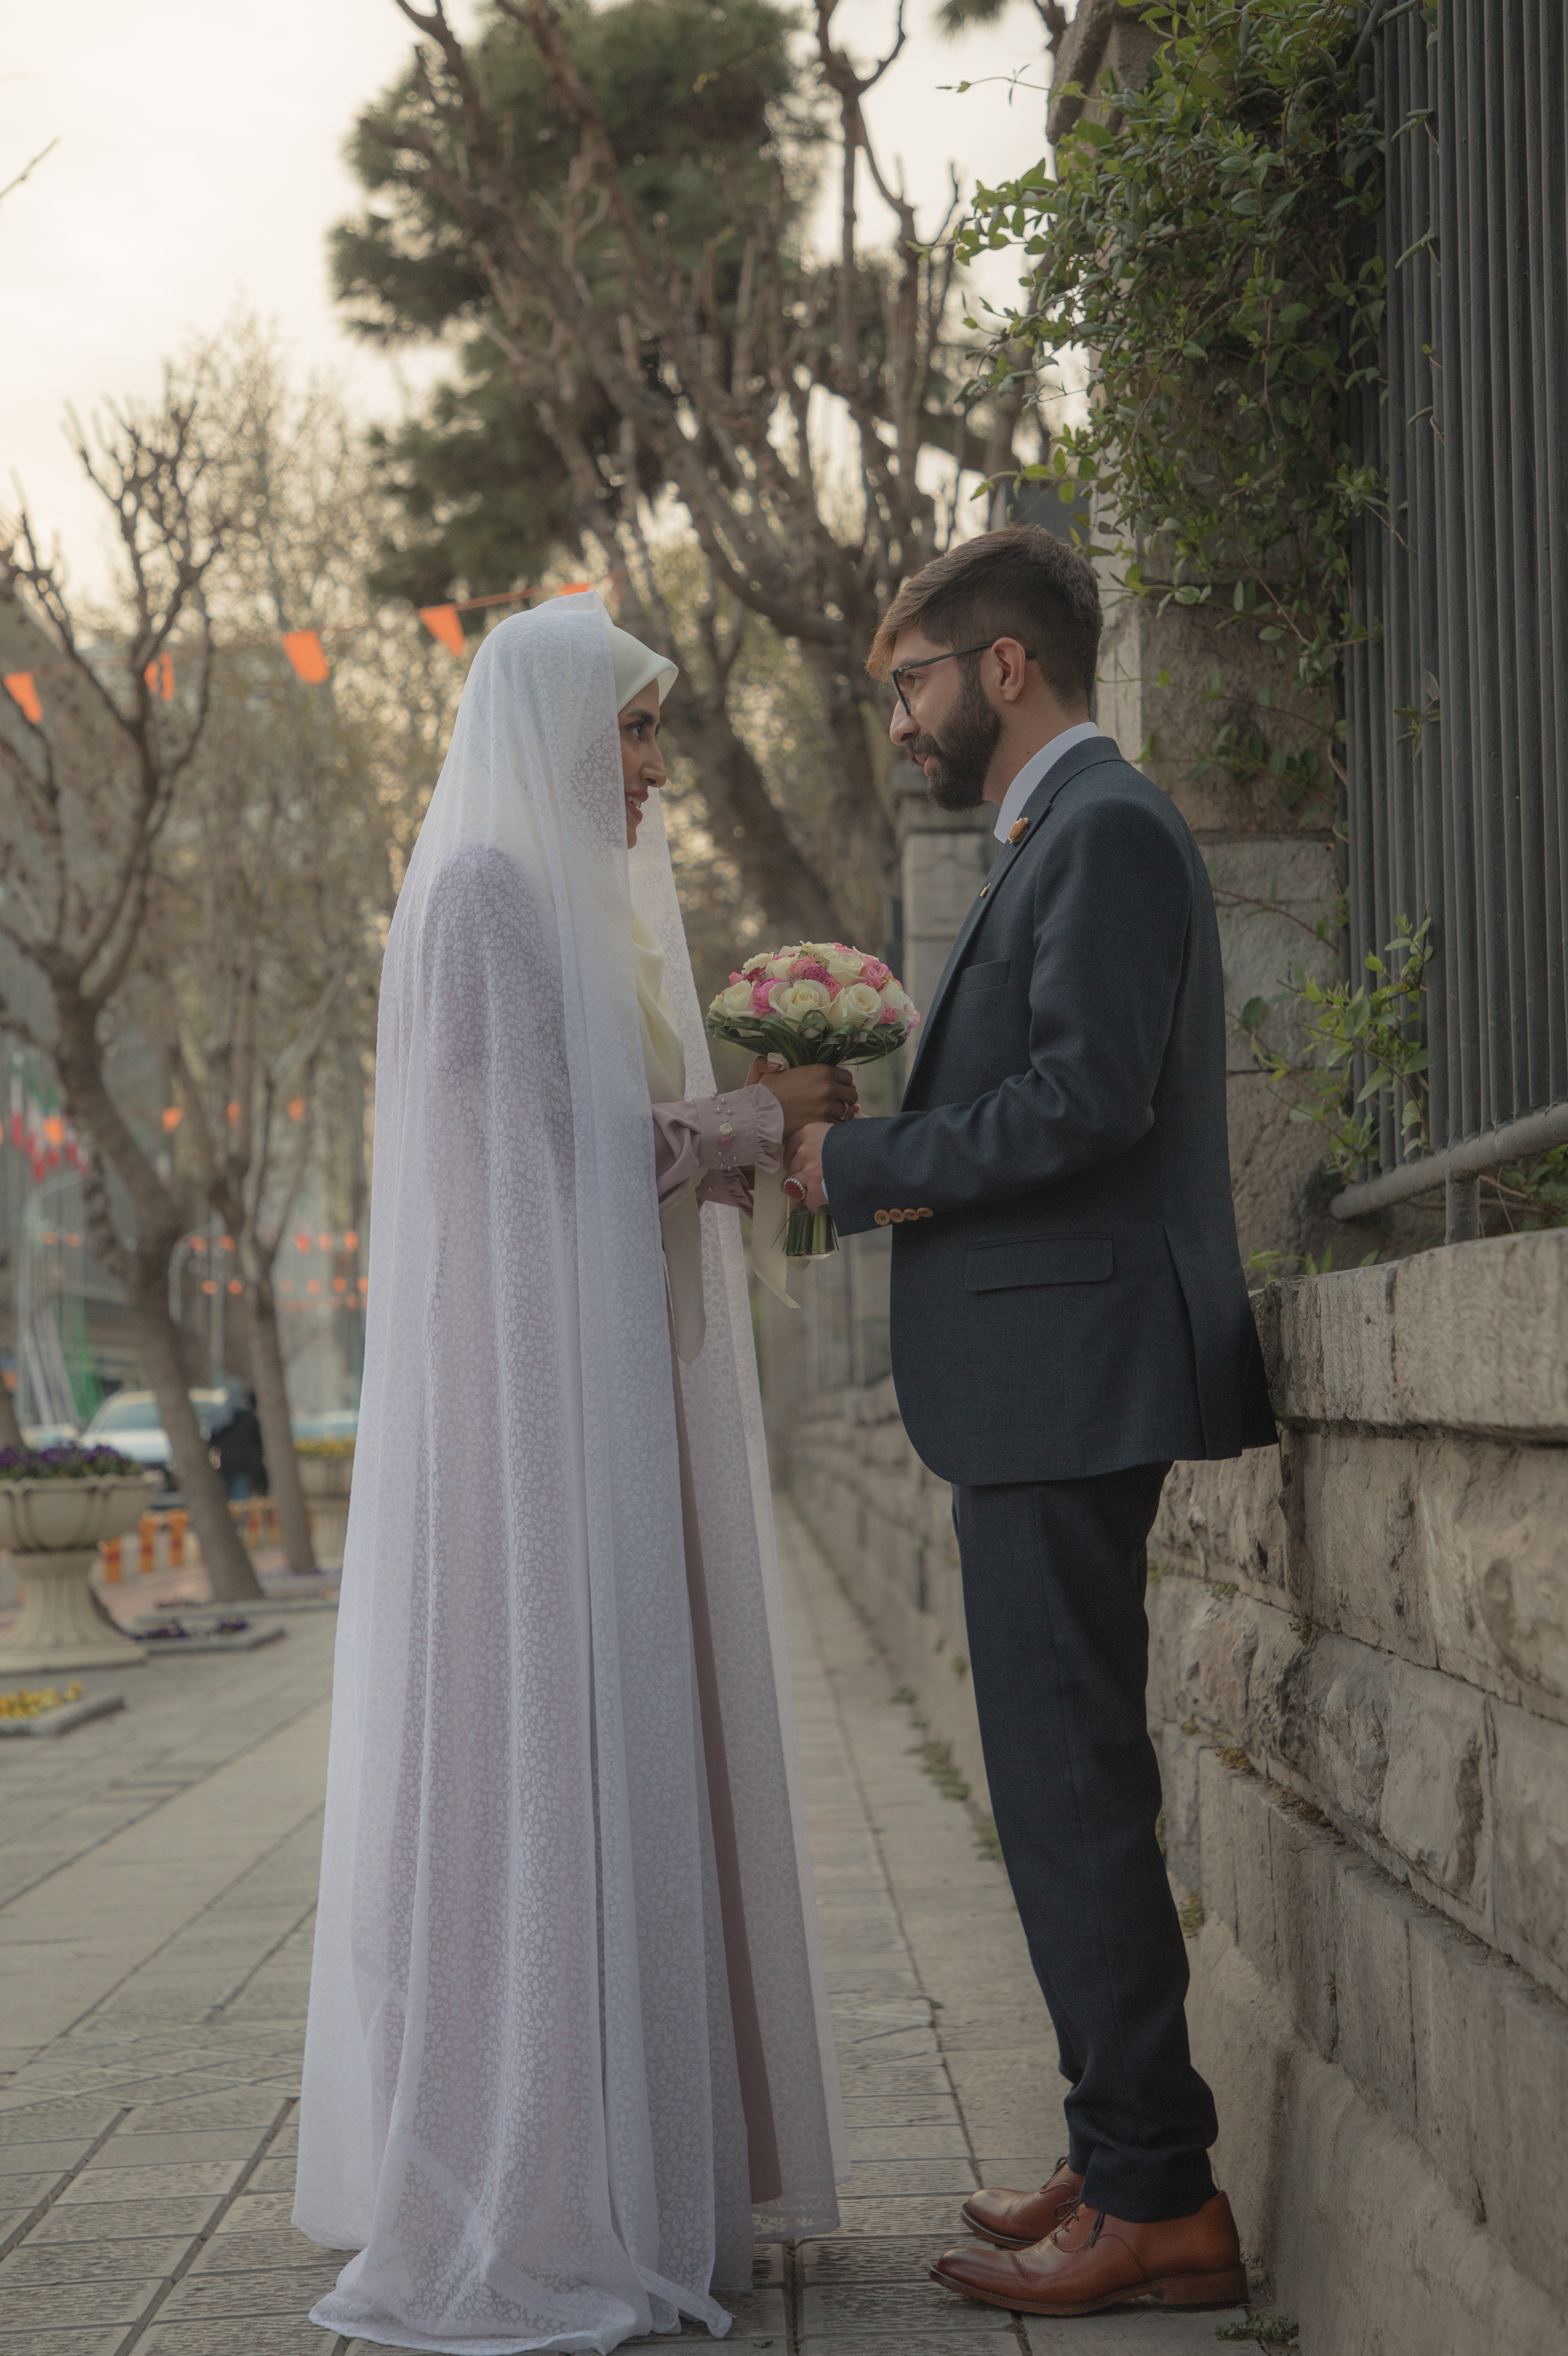 The story of an interesting wedding in the Ascension of the Martyrs / The body of the martyr who defended the shrine was the special guest of our wedding ceremony